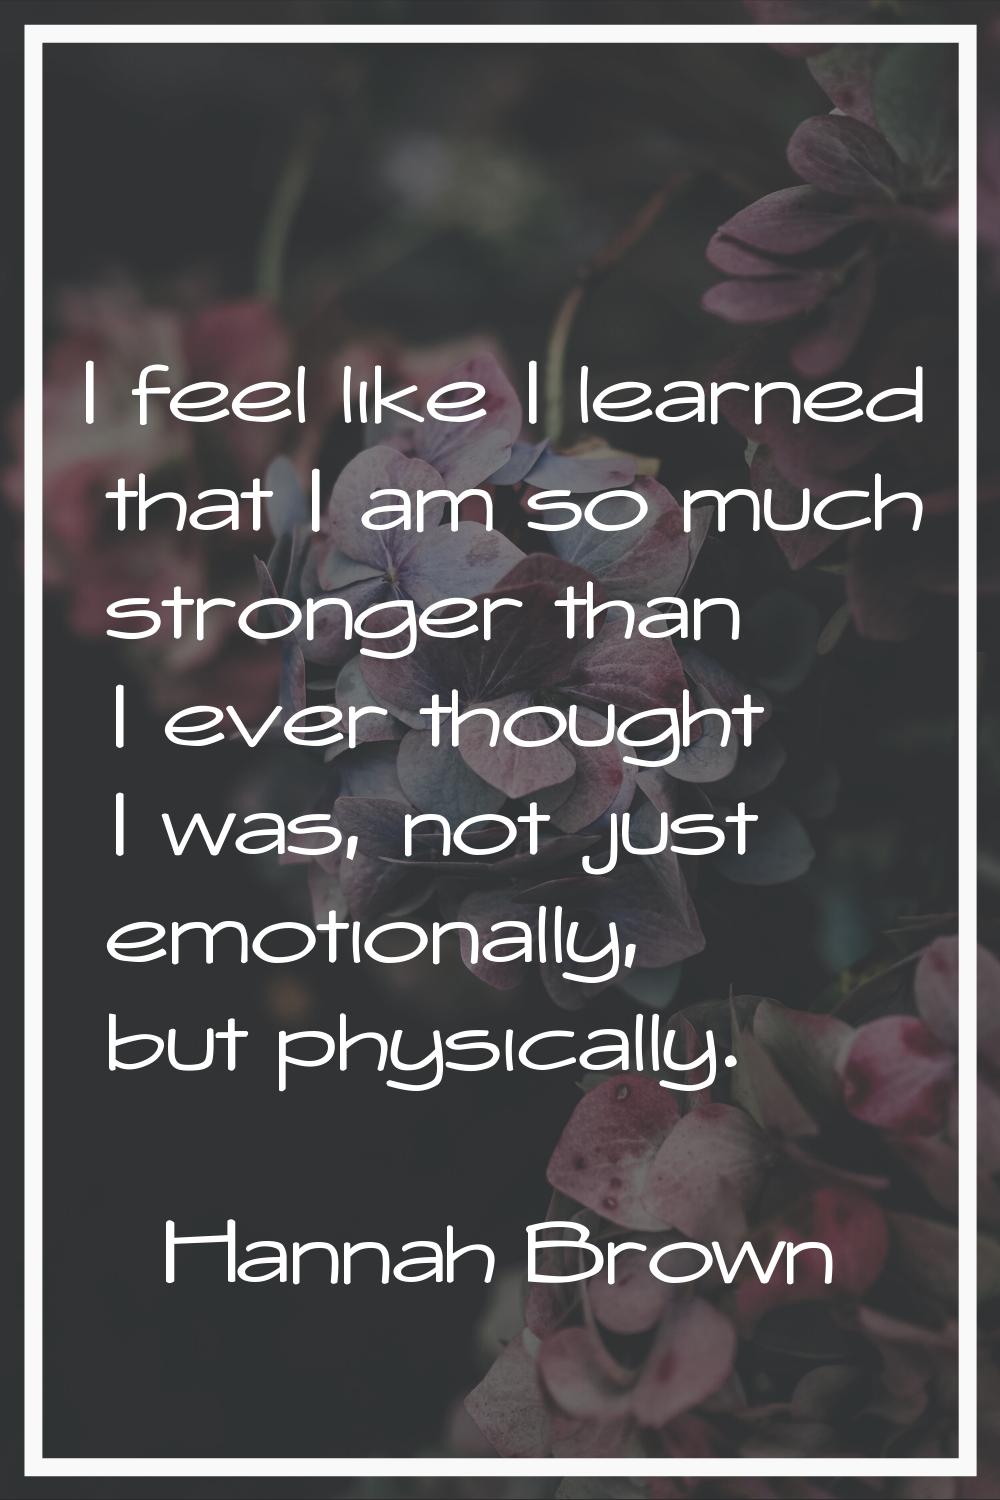 I feel like I learned that I am so much stronger than I ever thought I was, not just emotionally, b